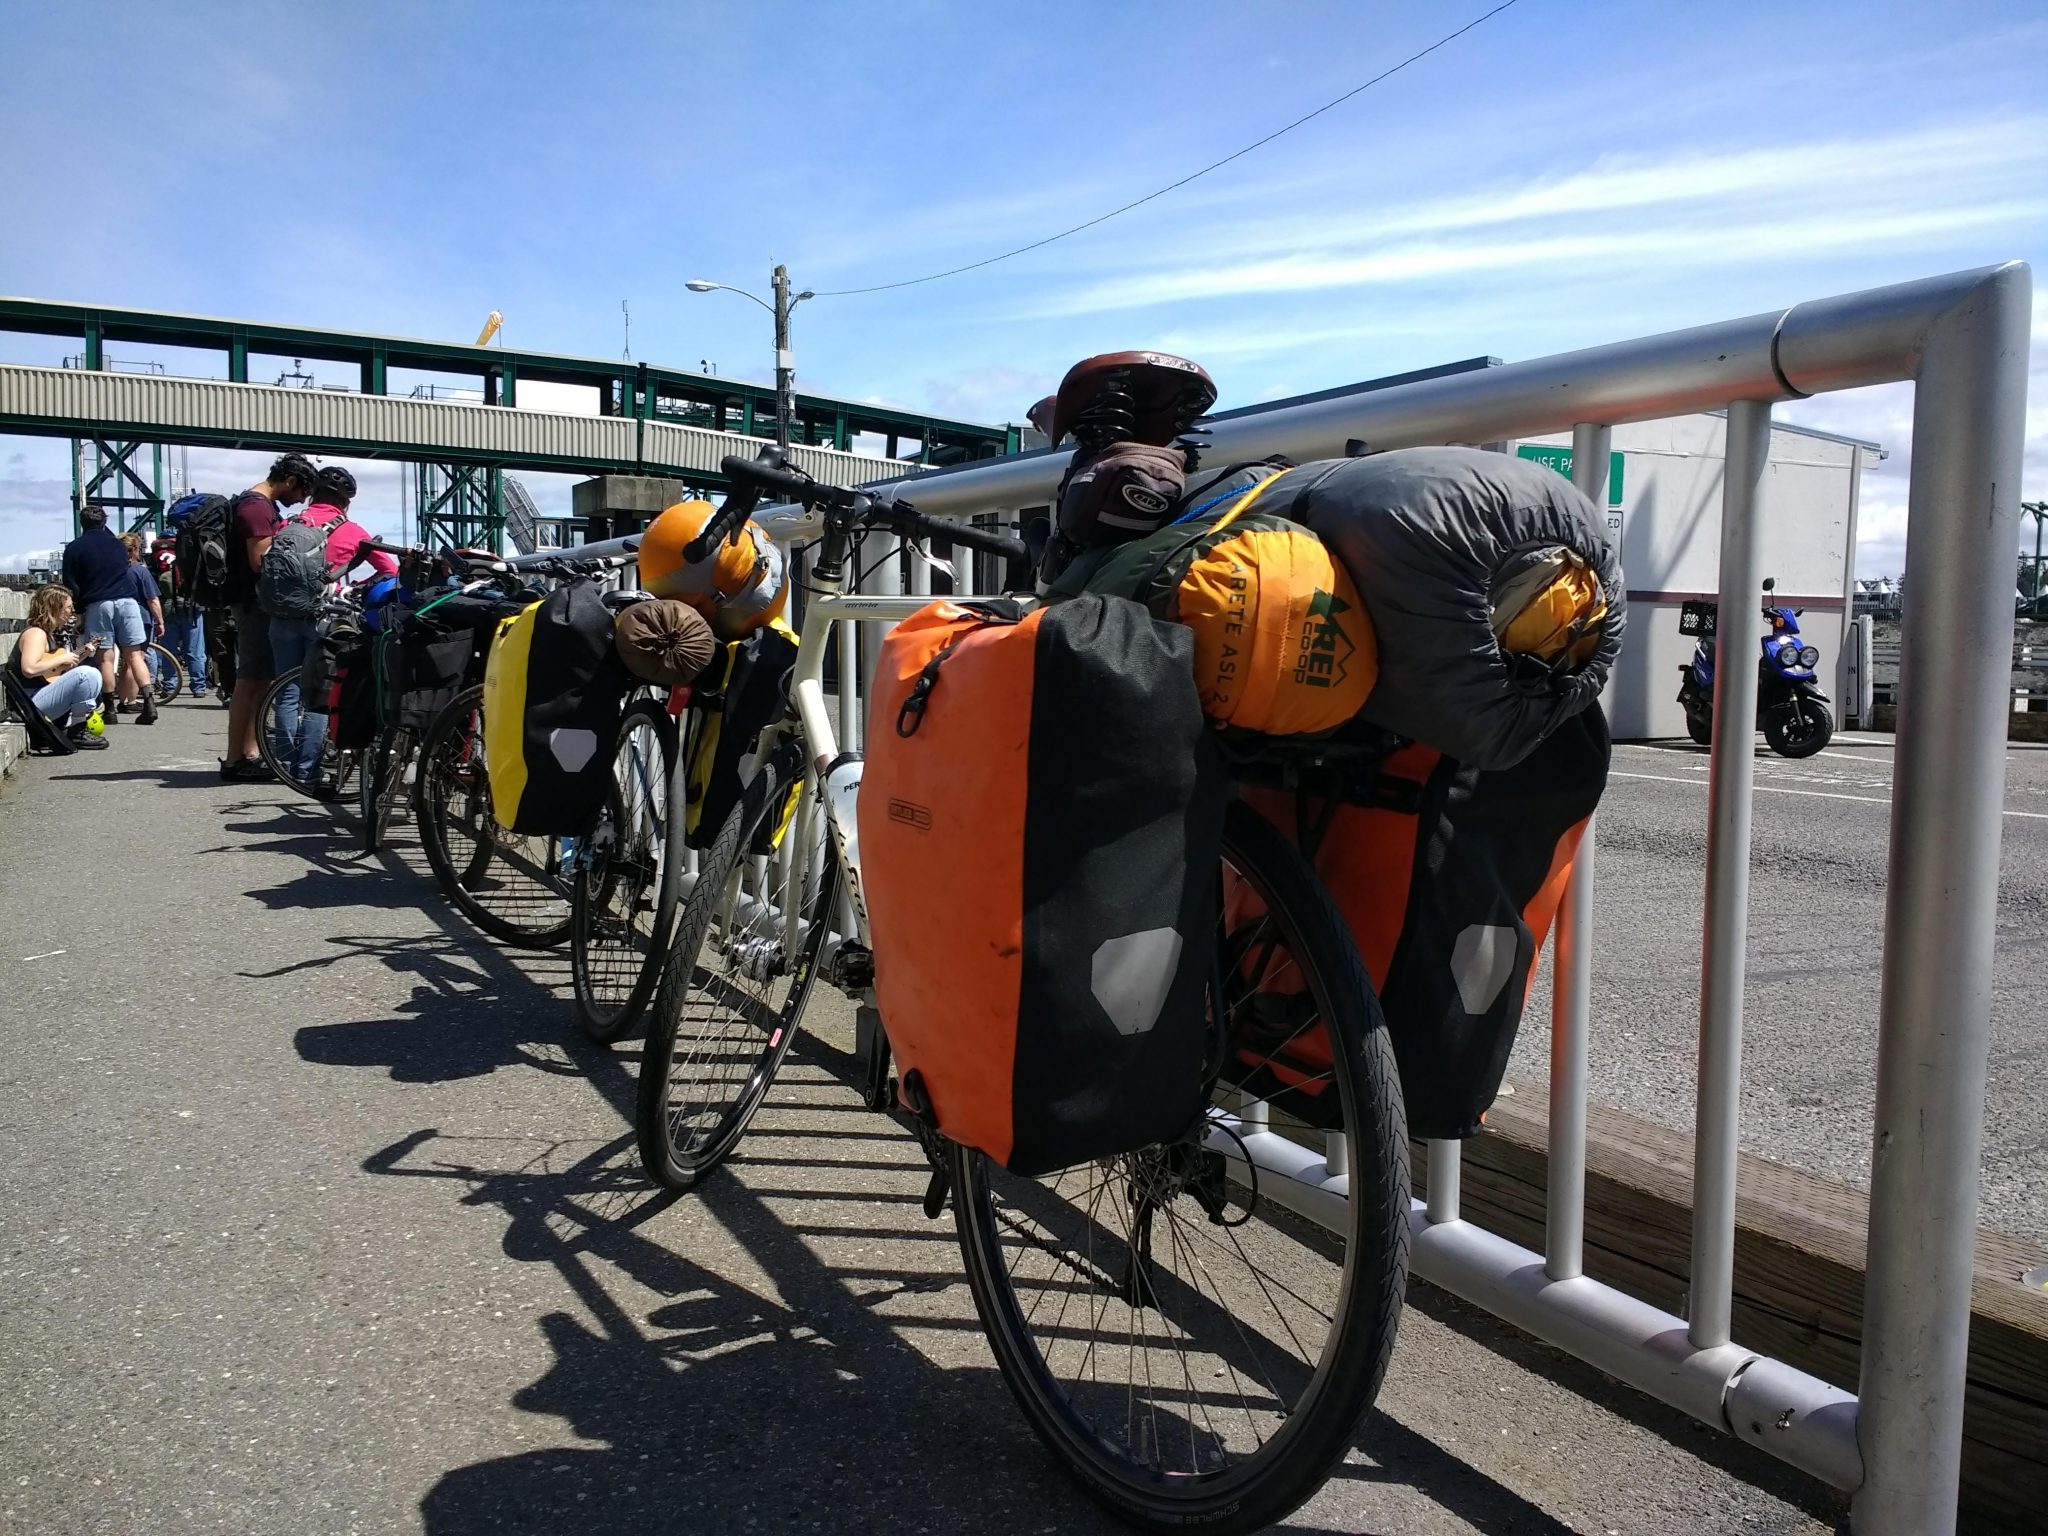 A group of bikes loaded with colorful camping gear next to a metal barrier on a dock, getting ready for Lopez Island bike camping